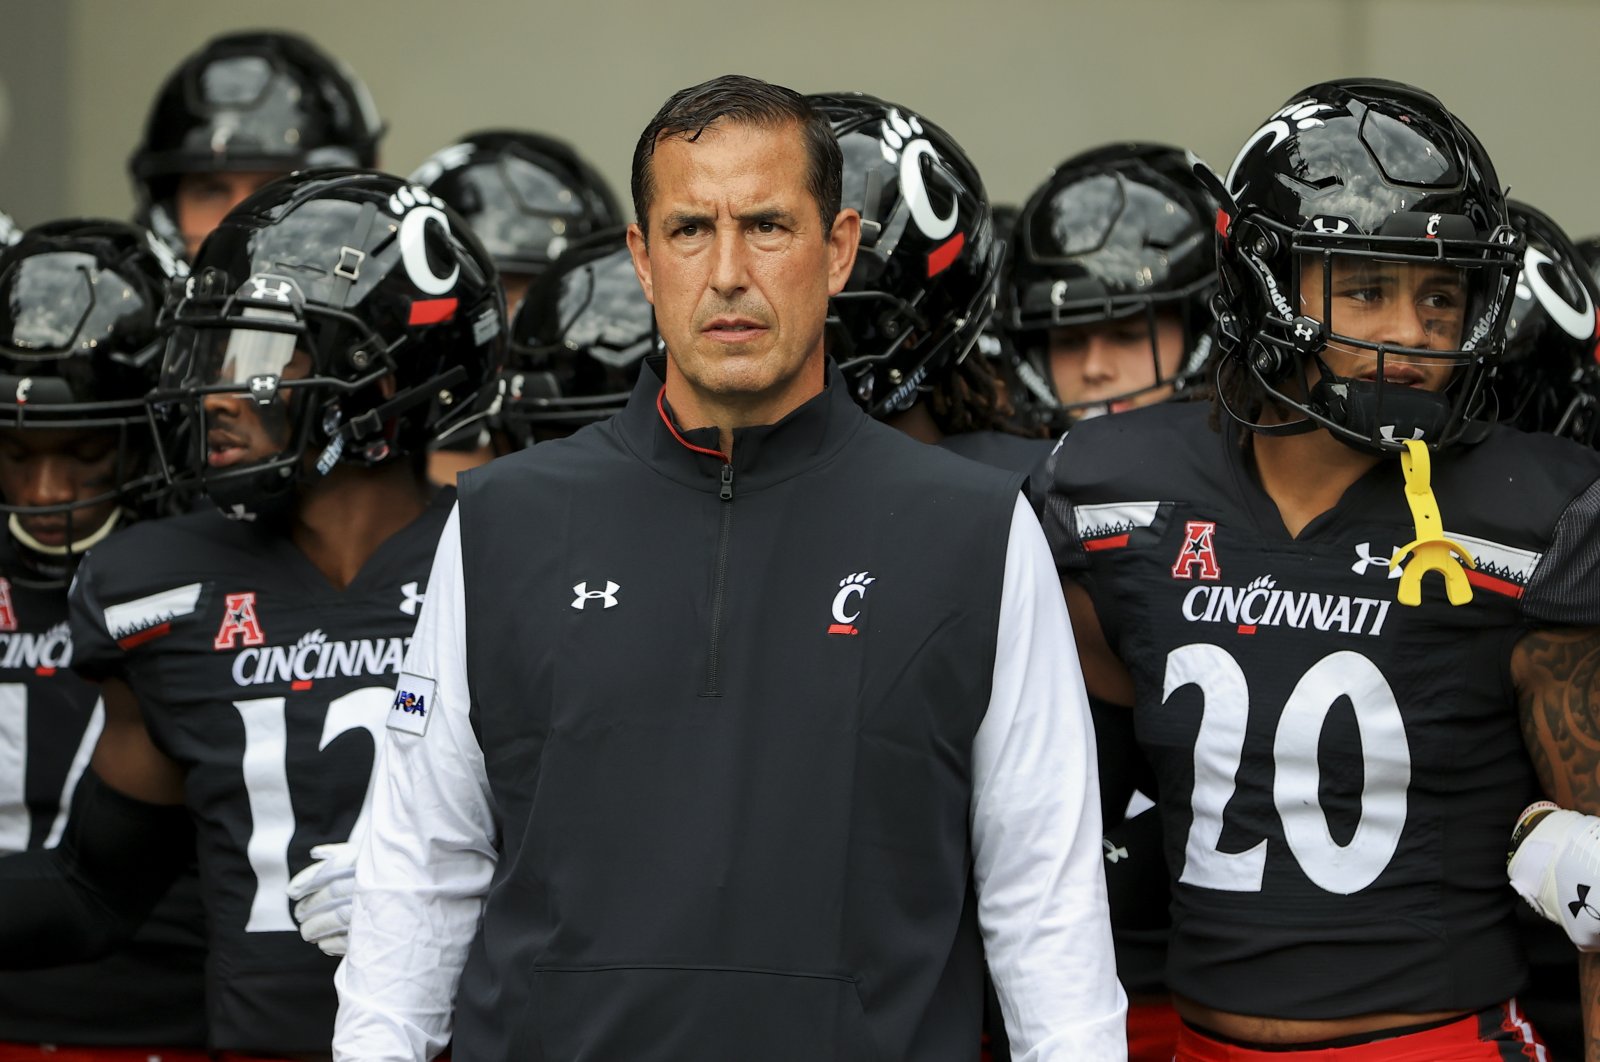 Cincinnati Bearcats coach Luke Fickell stands with his team prior to the game against the Miami (Ohio) Redhawks at Nippert Stadium, Cincinnati, Ohio, U.S., Sept. 4, 2021. (Aaron Doster-USA TODAY Sports via Reuters)